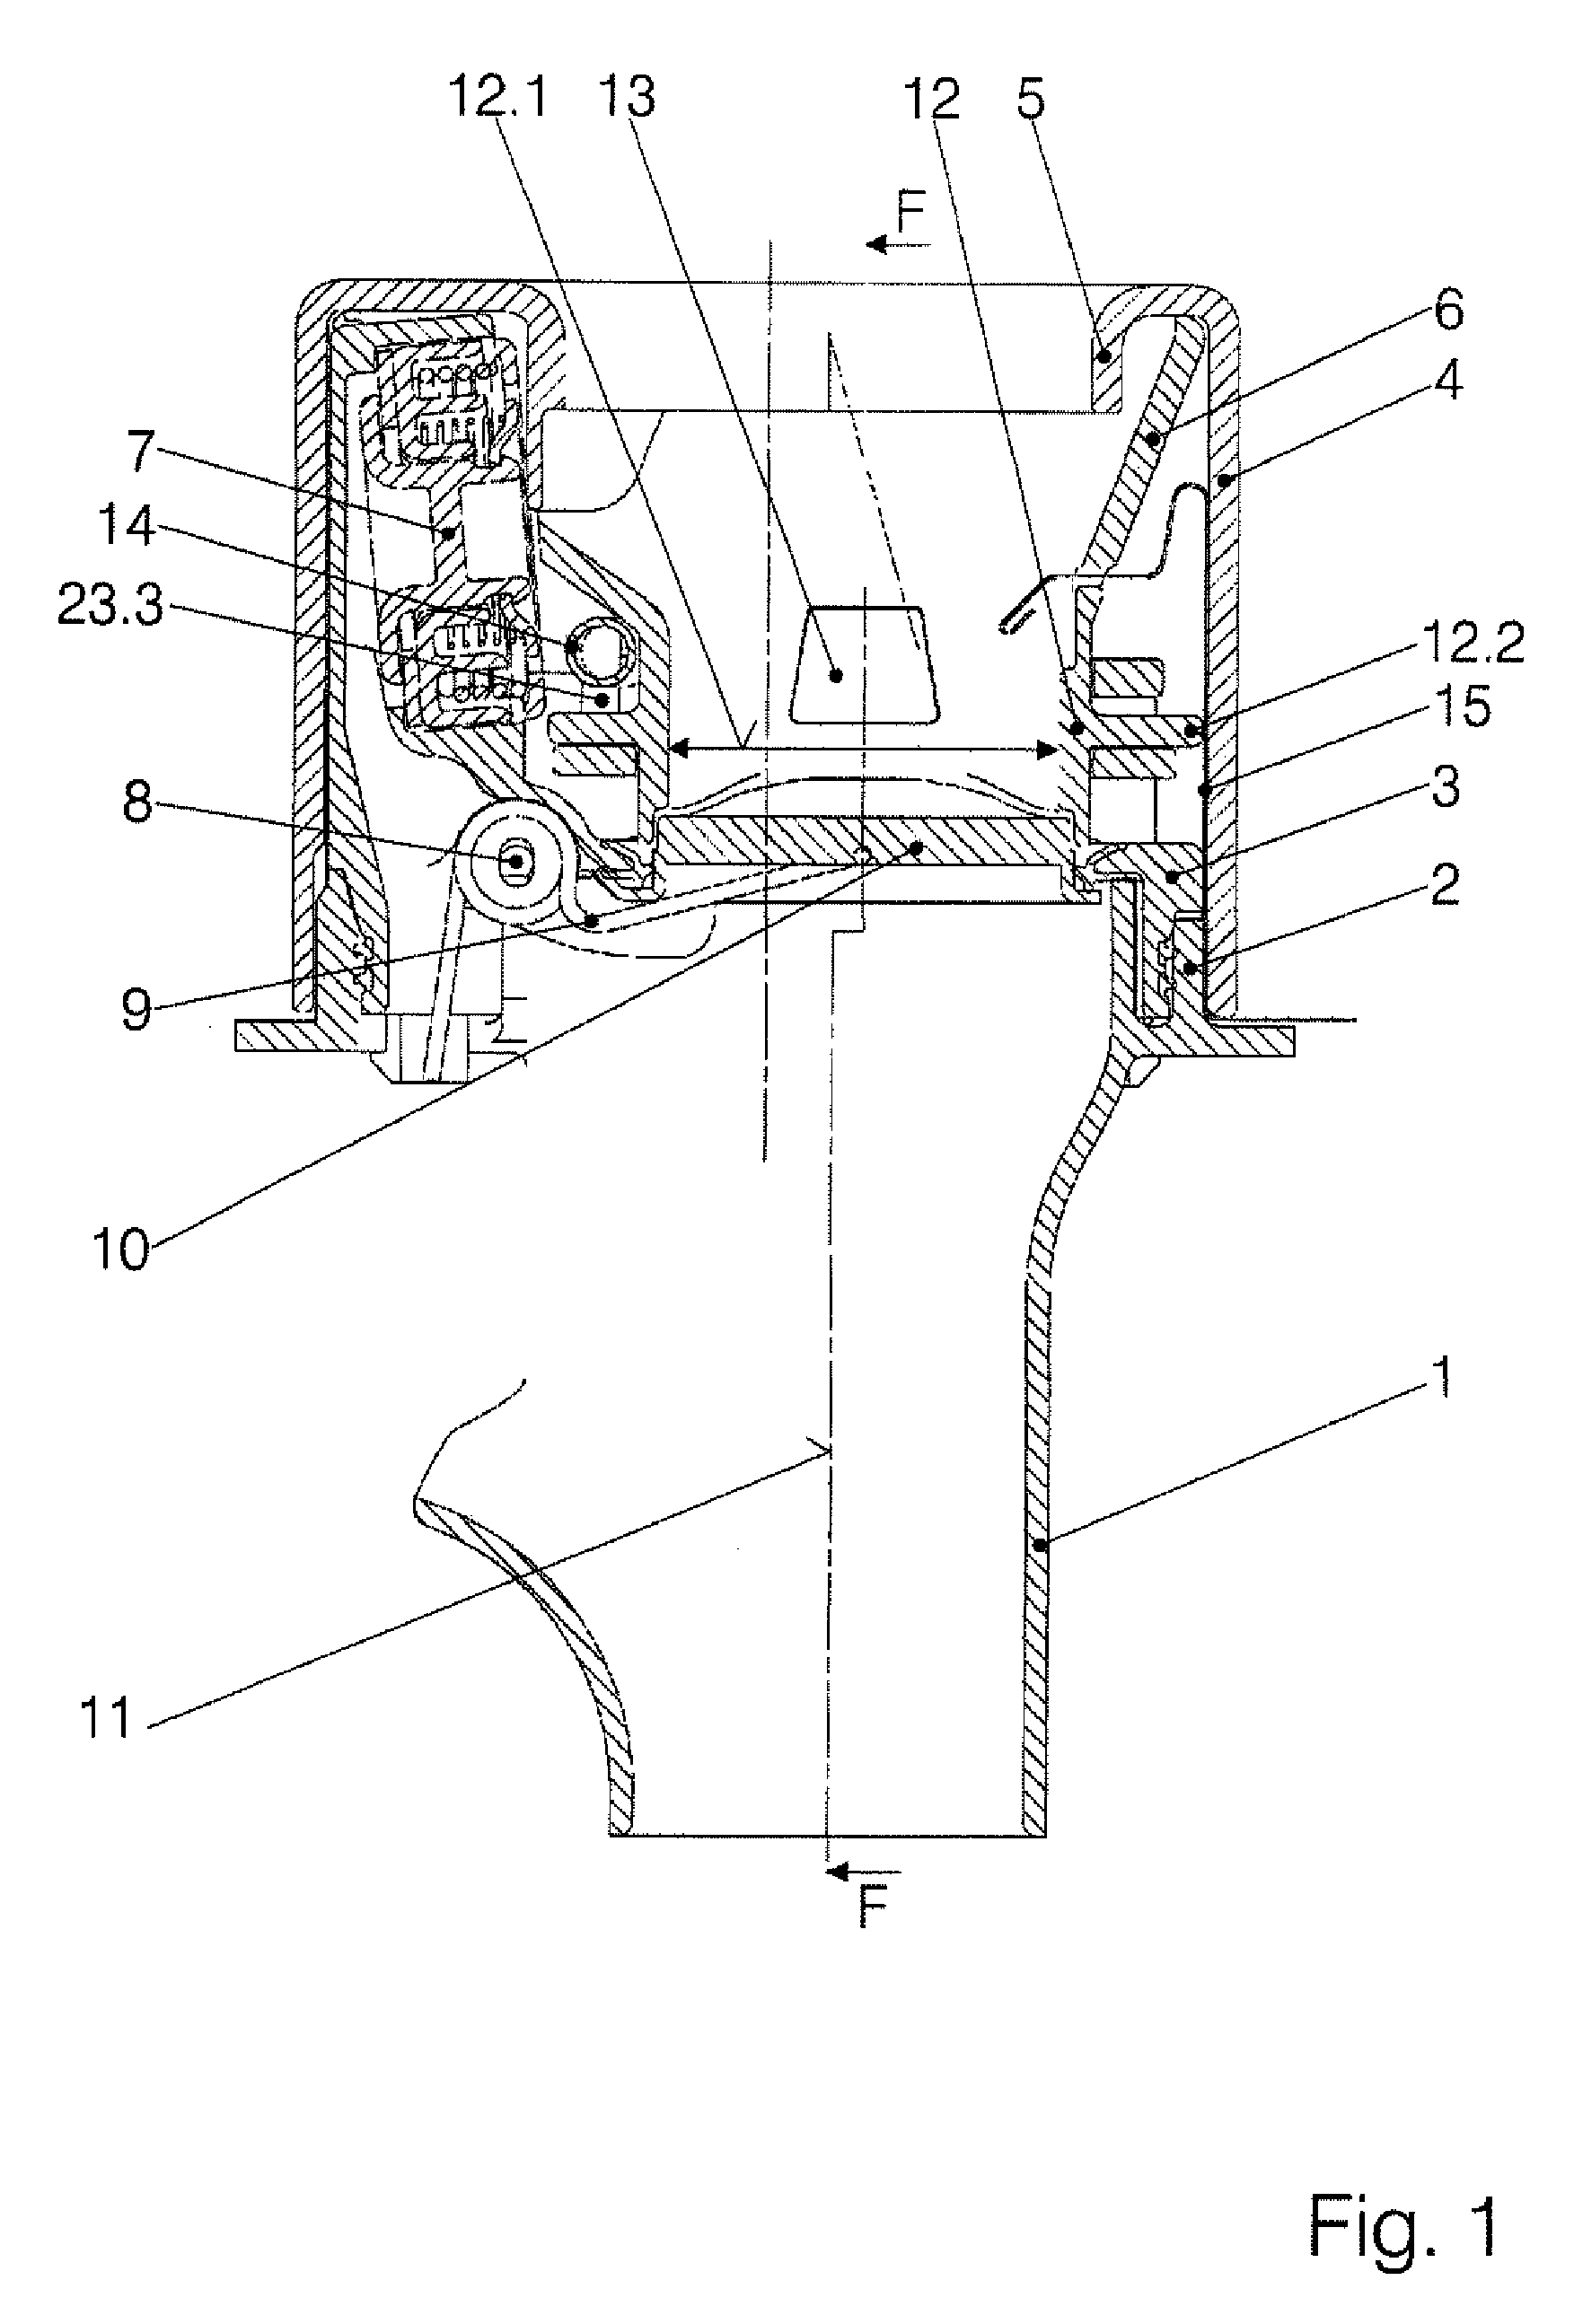 Filler neck of a fuel tank with an arrangement for preventing incorrect fueling